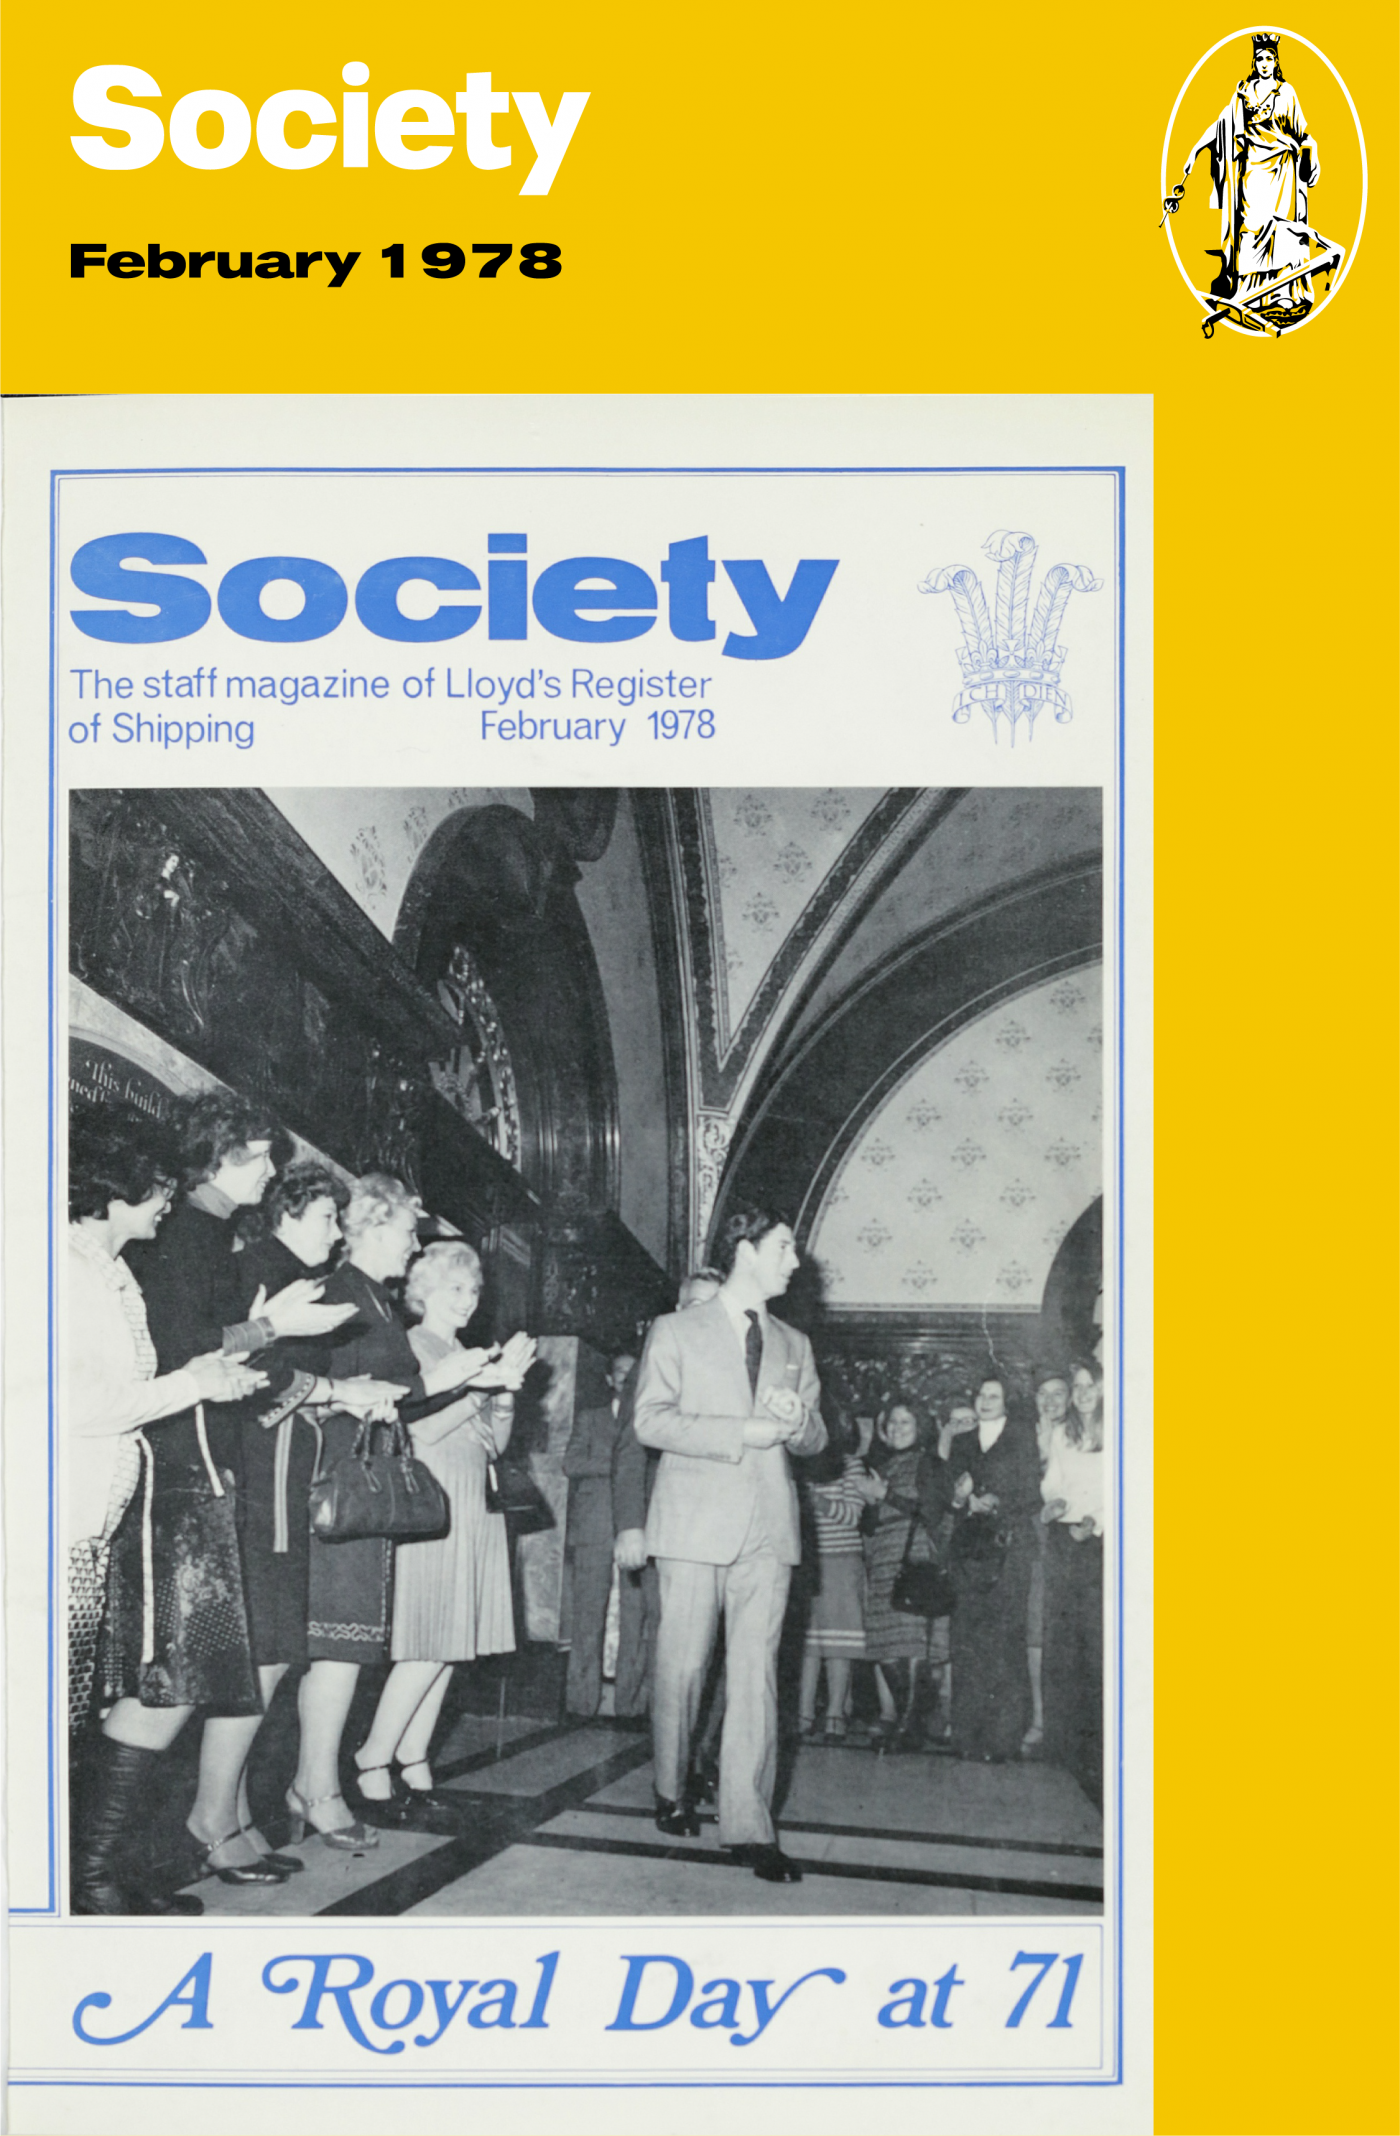 In 1978, Prince Charles was made an honourary member of Lloyd's Register's General Committee, an event, which understandably, dominated the February 1978 edition of <i>Society<i>.